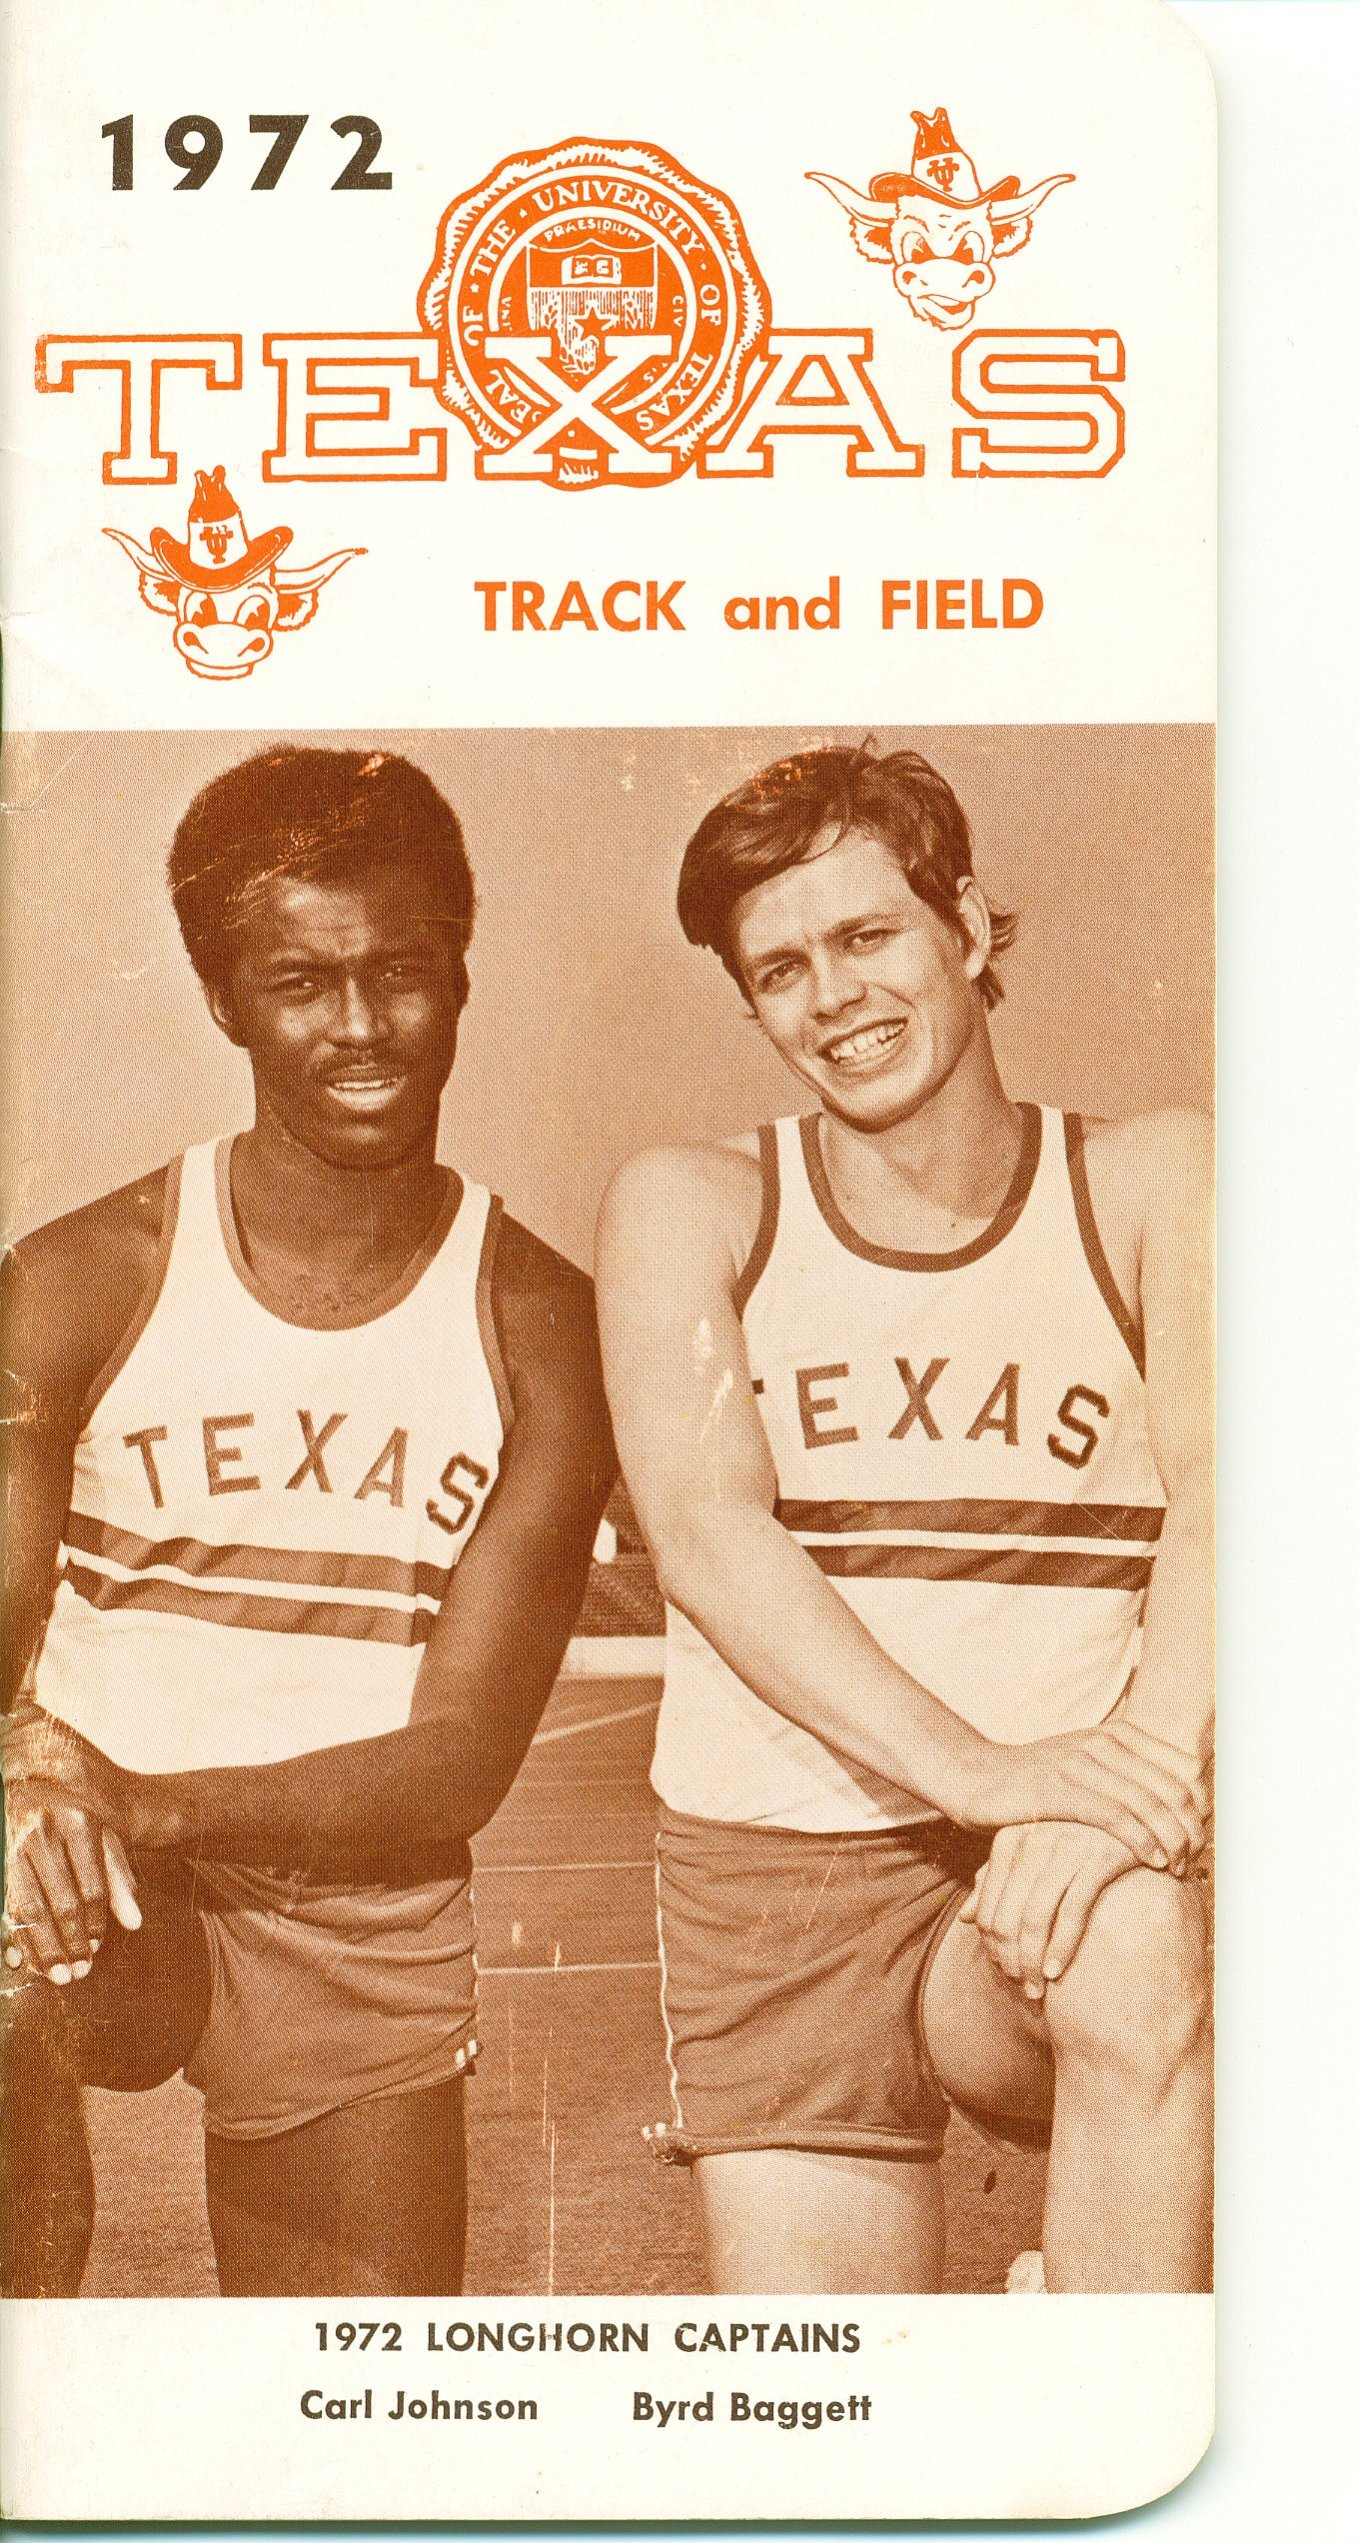 1972 track.png